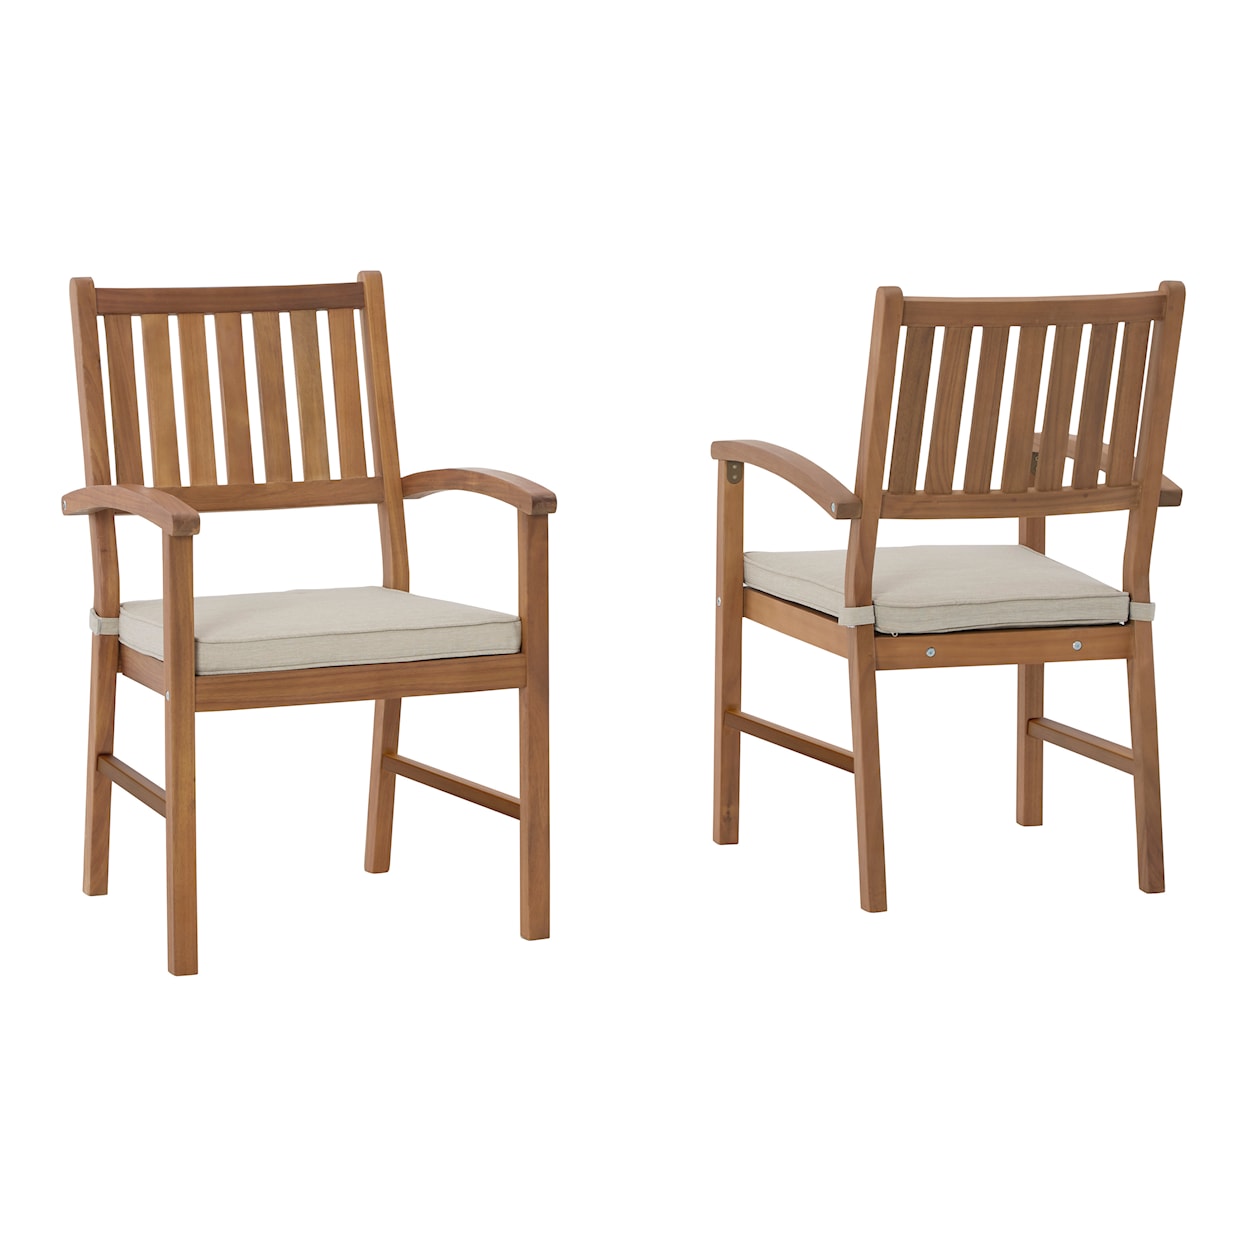 Signature Design Janiyah Outdoor Dining Set w/ 2 Chairs & Bench